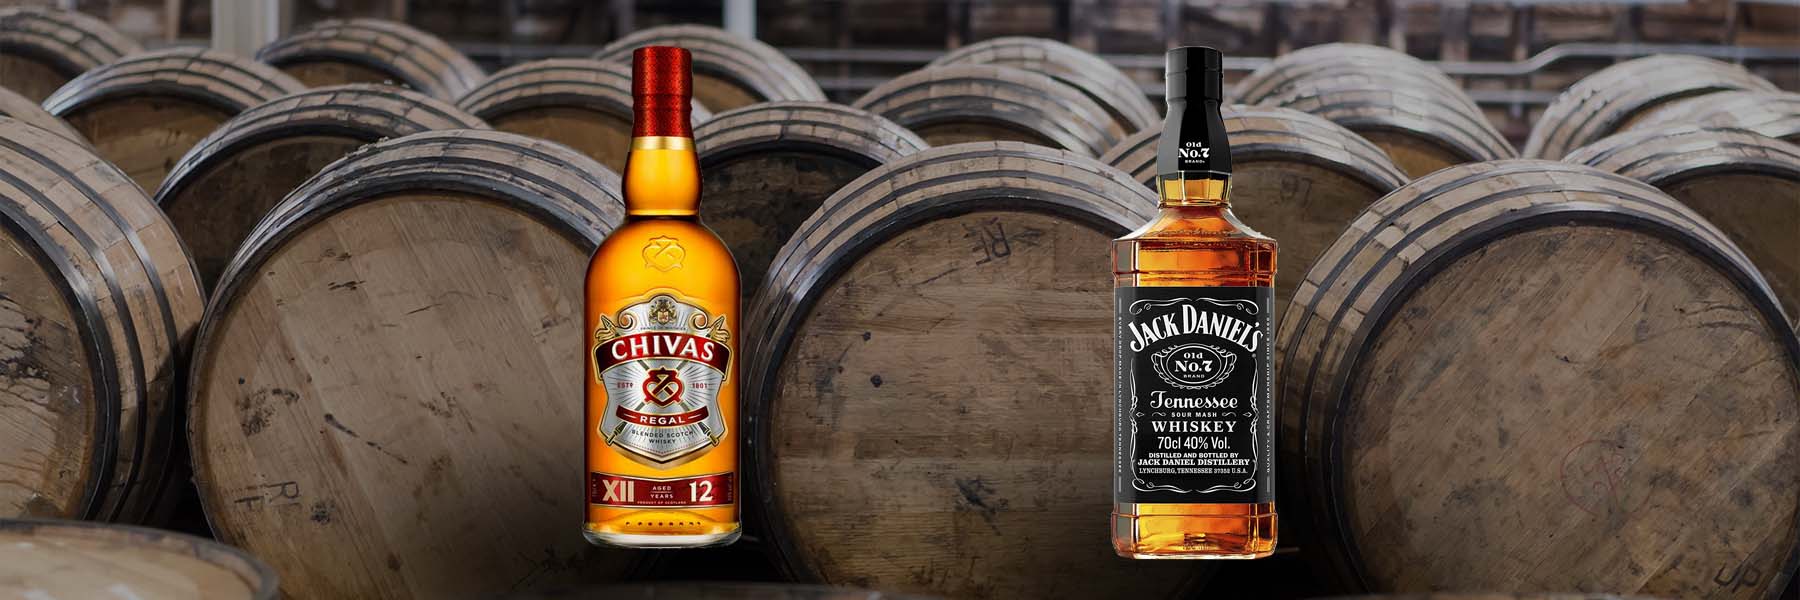 sitio Periódico Leer Chivas Regal vs Jack Daniels | Which will come out on top? | Whisky-World